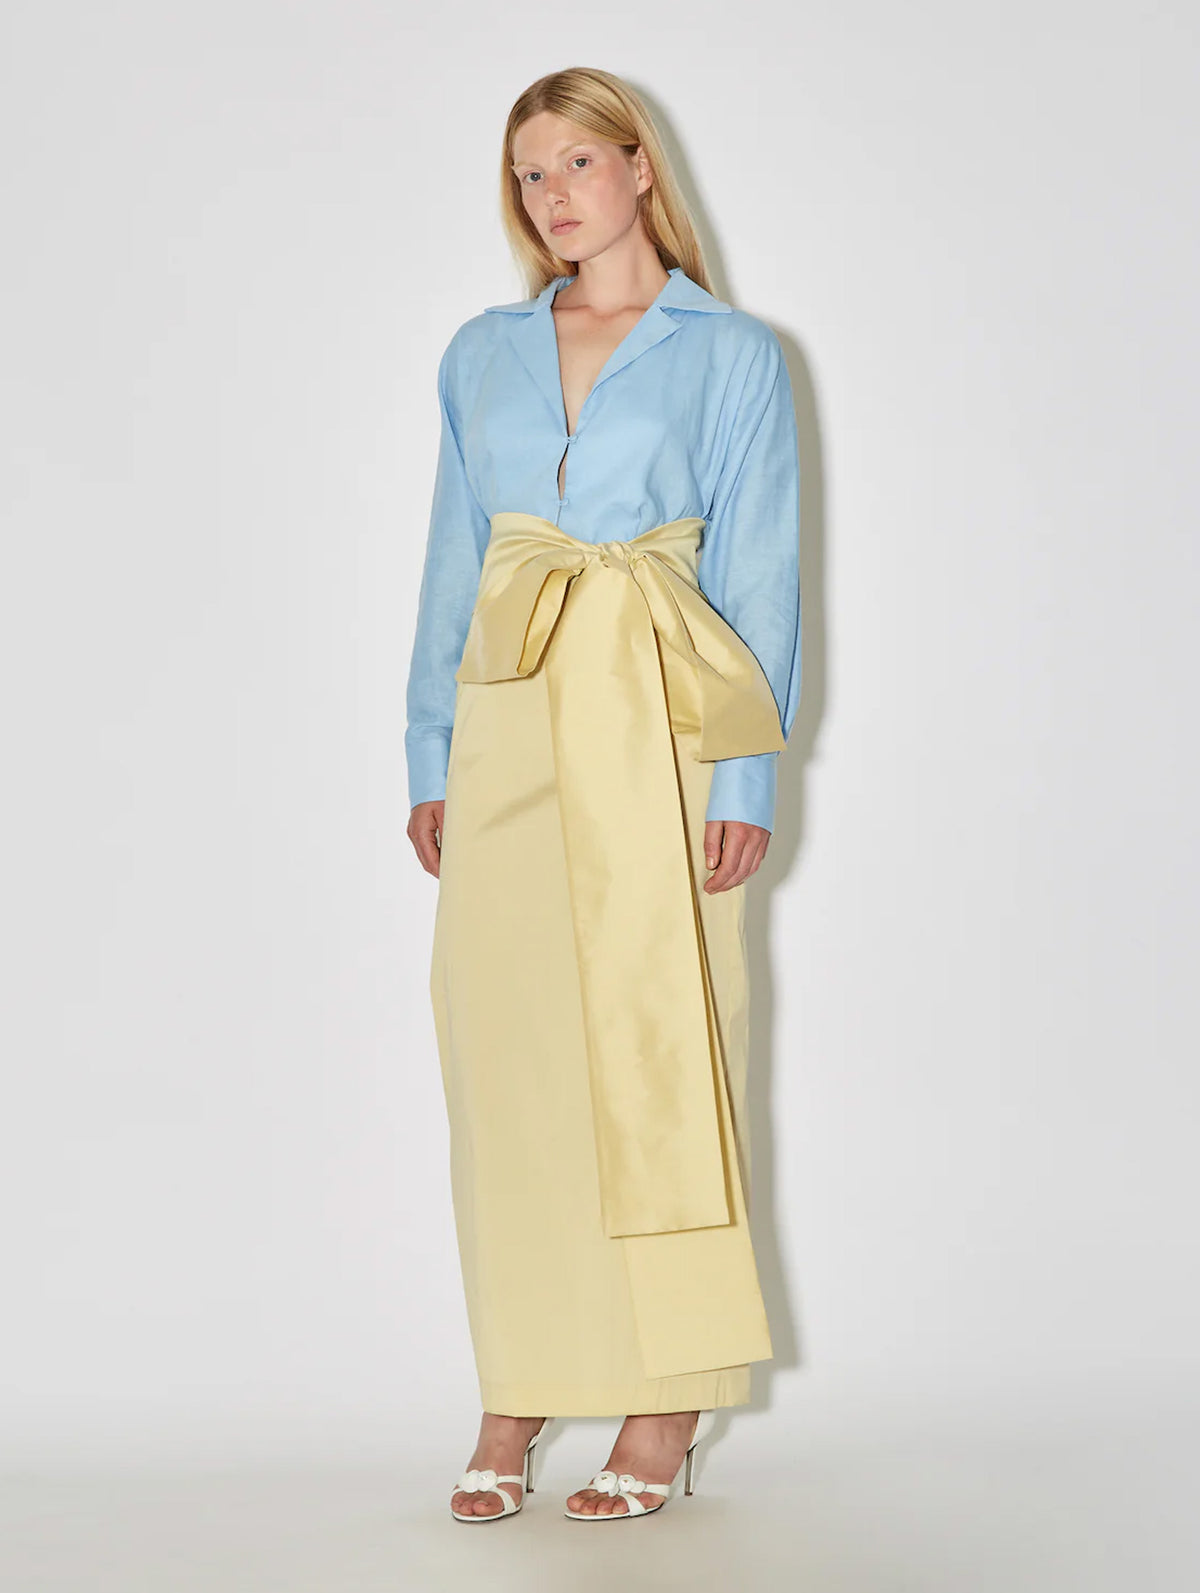 Claire Dress in Soft Yellow & Blue